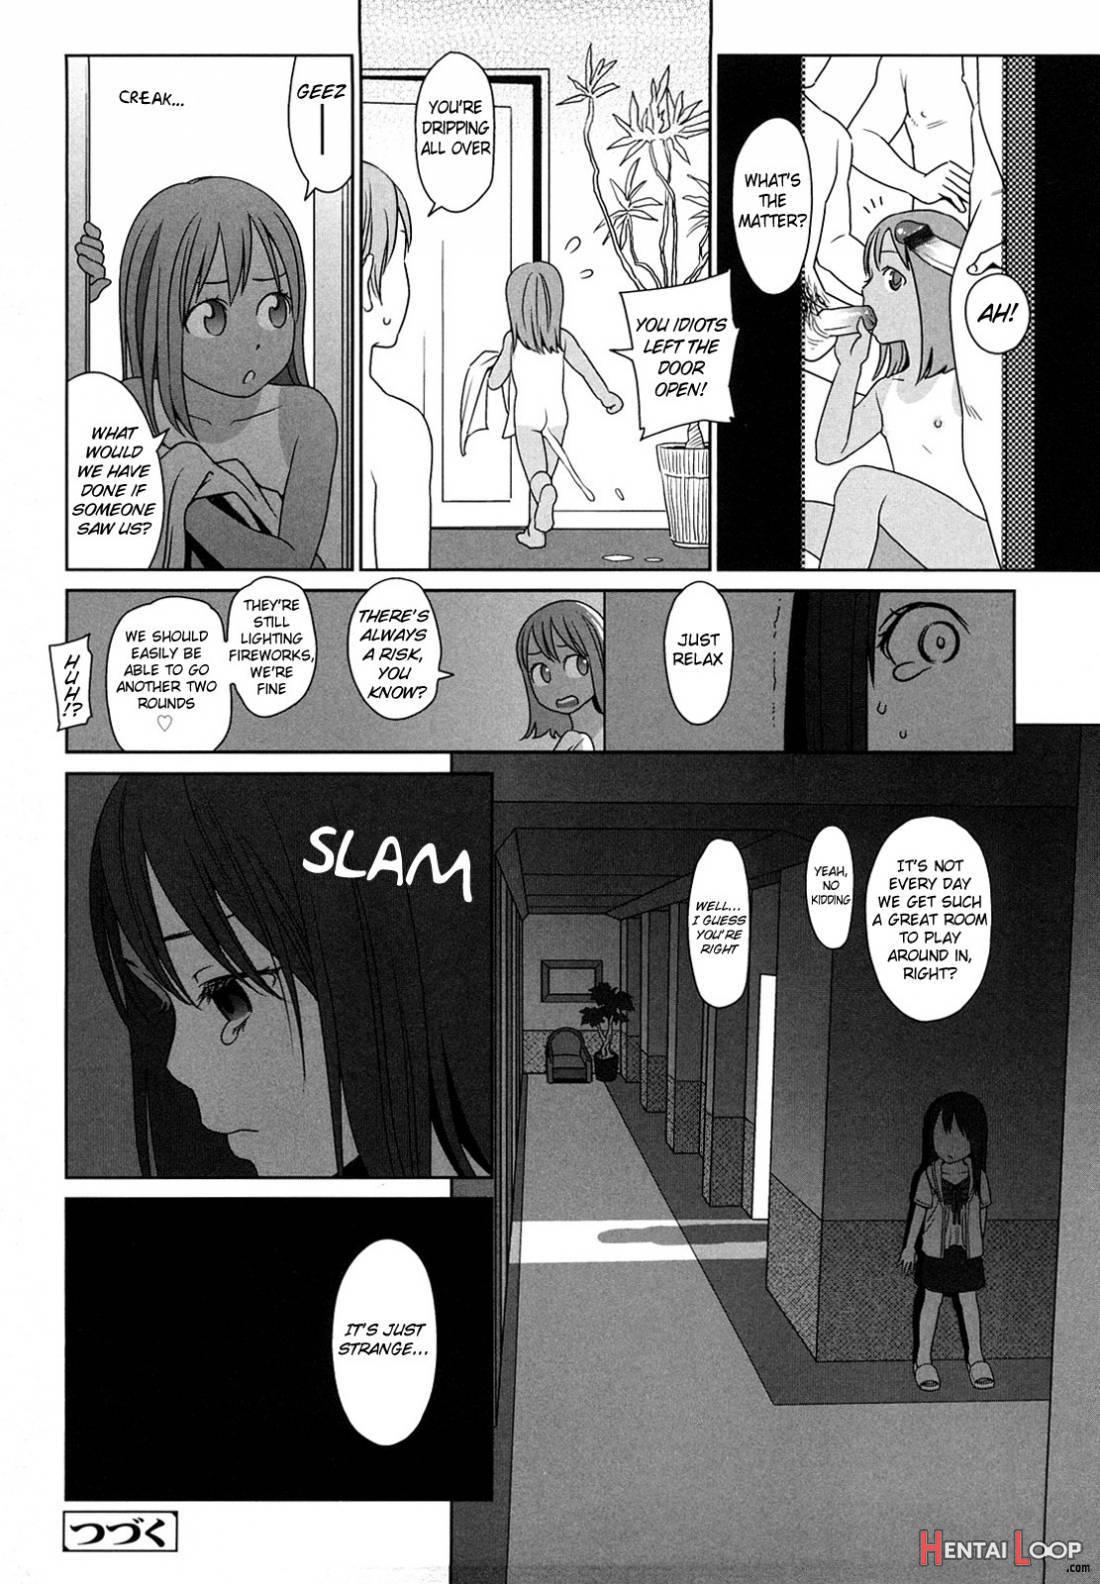 Japanese Preteen Suite page 183